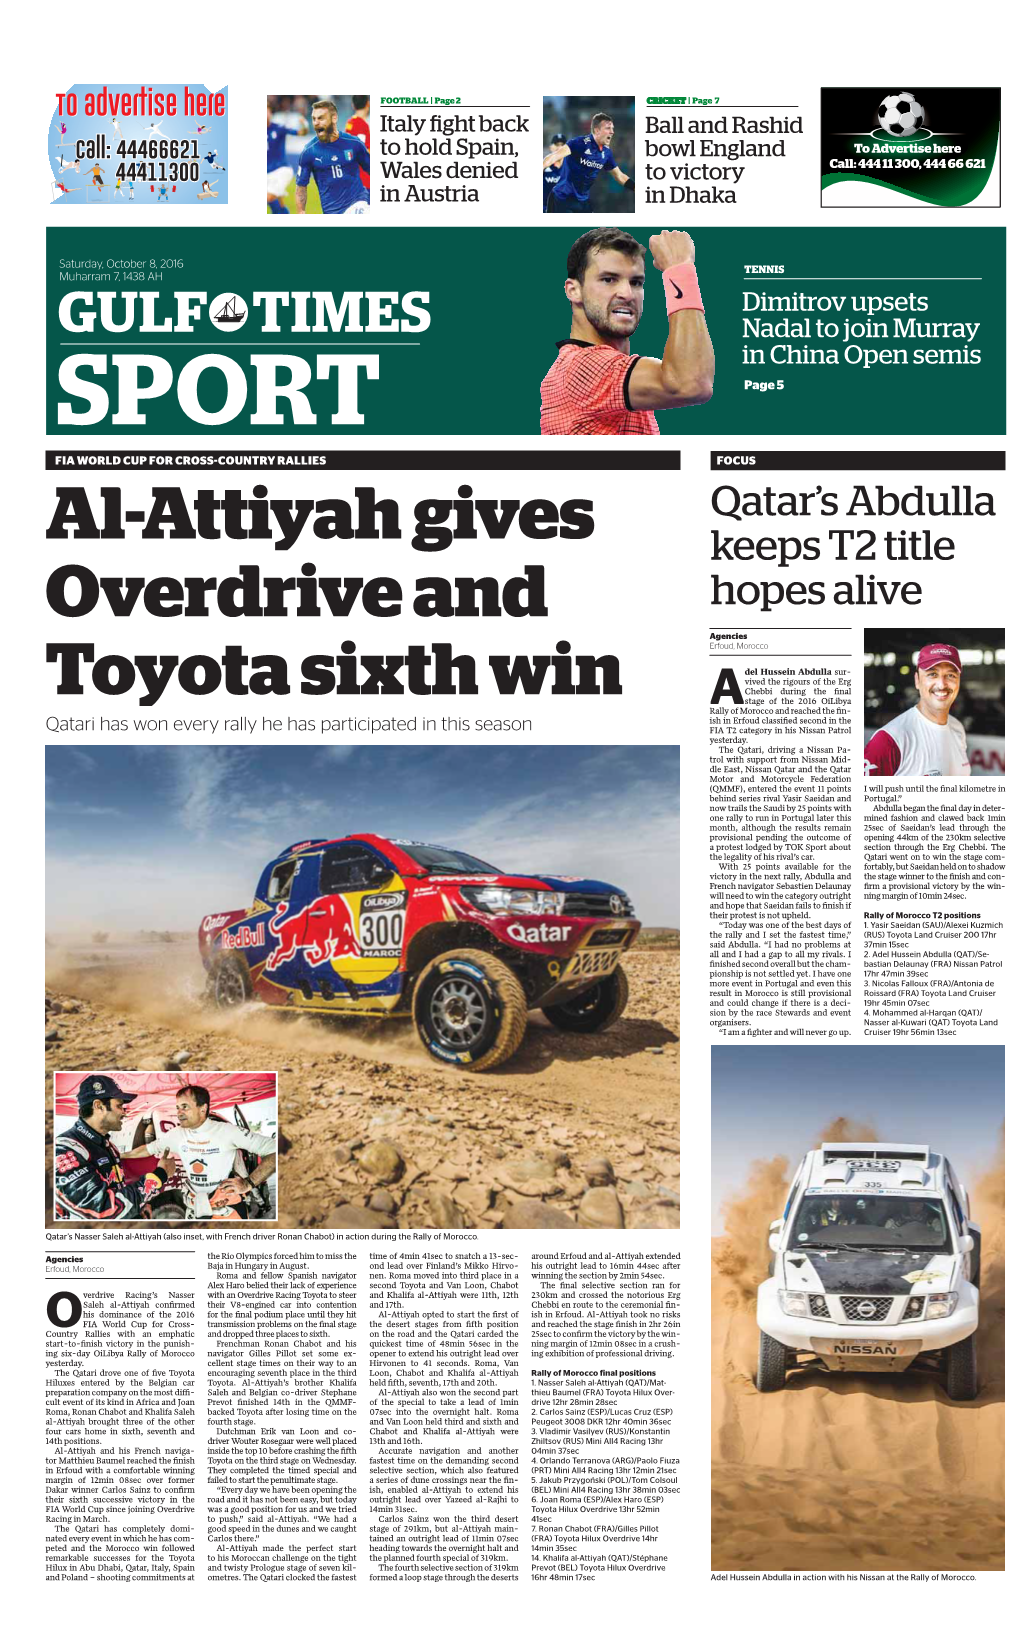 Al-Attiyah Gives Overdrive and Toyota Sixth